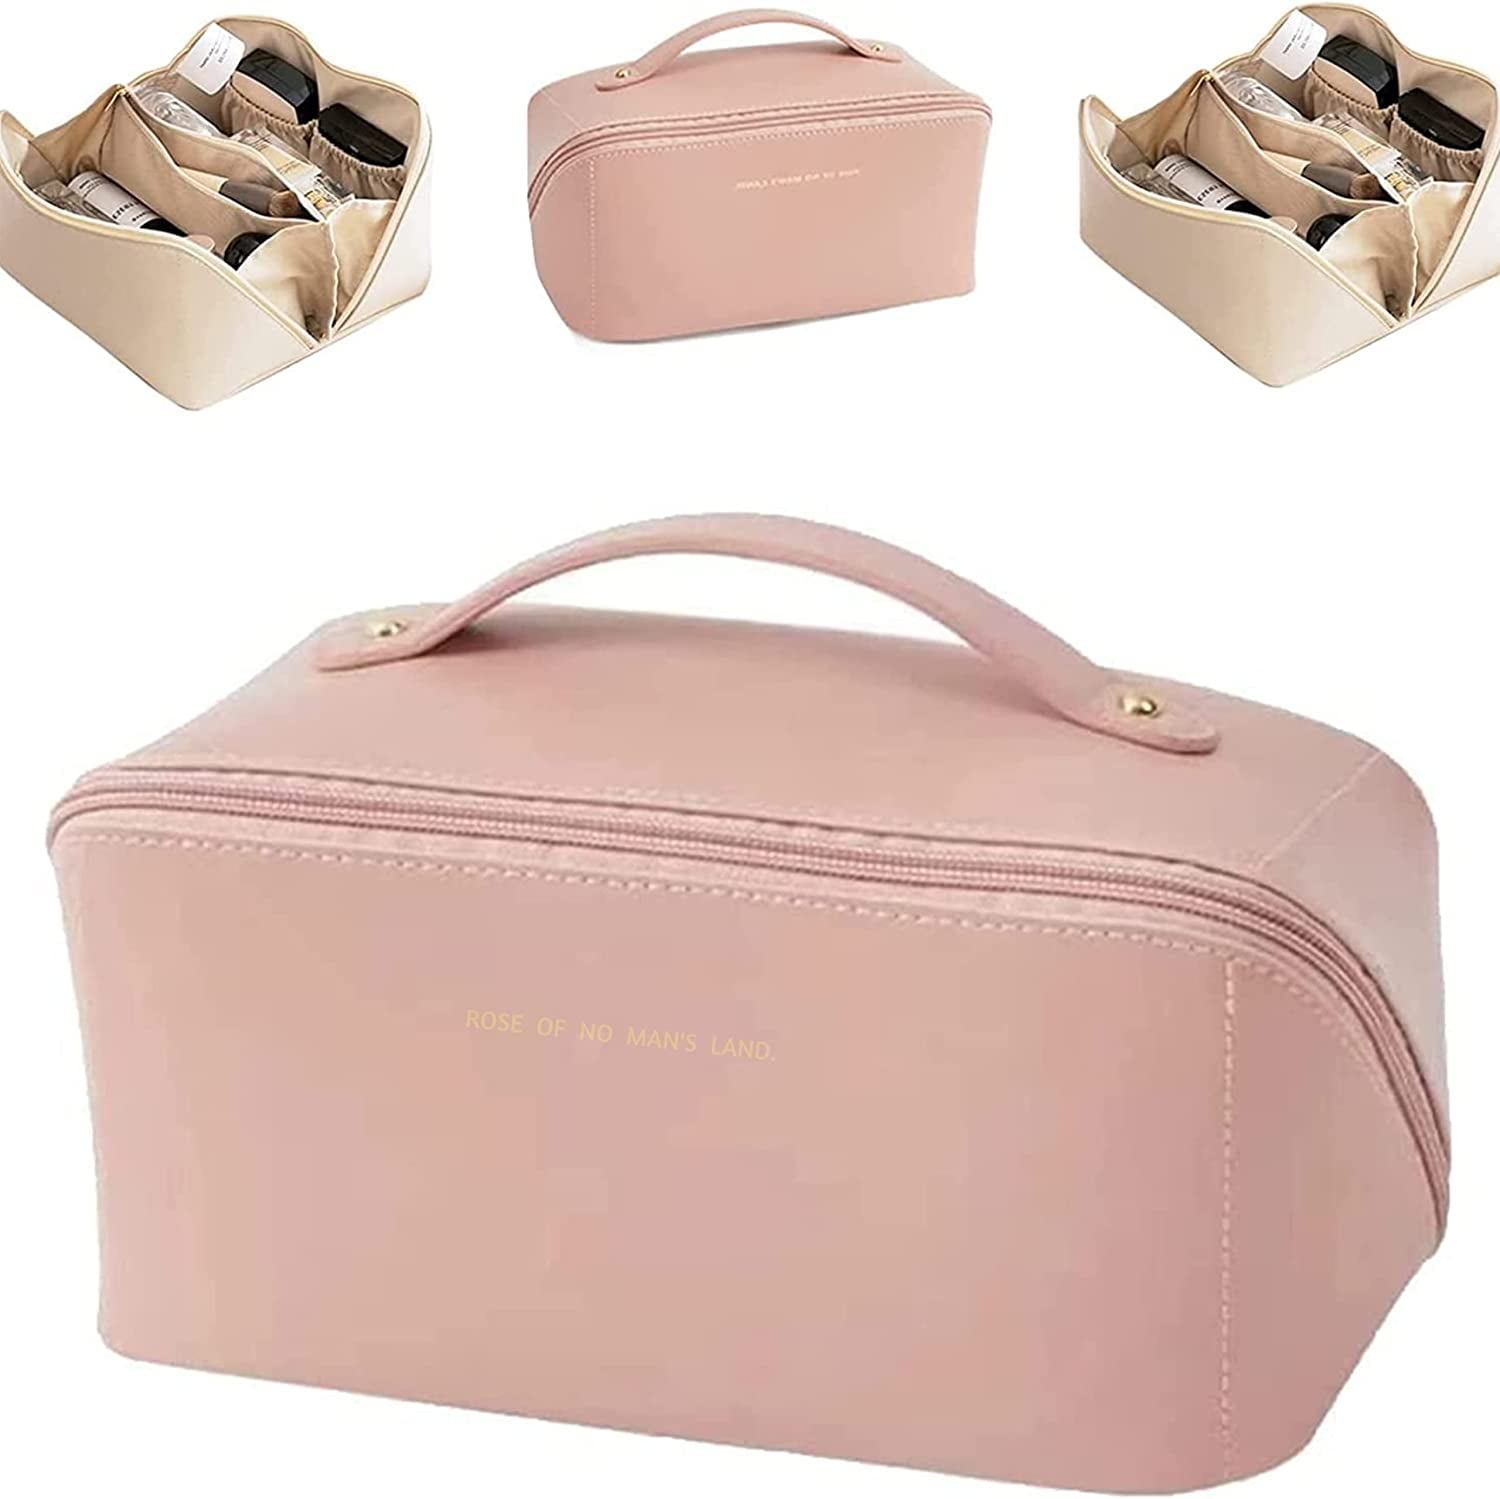 Capacity Travel Makeup Bag Wide-Open PU Leather Toiletry Bag Organizer Pink in Brown | Large